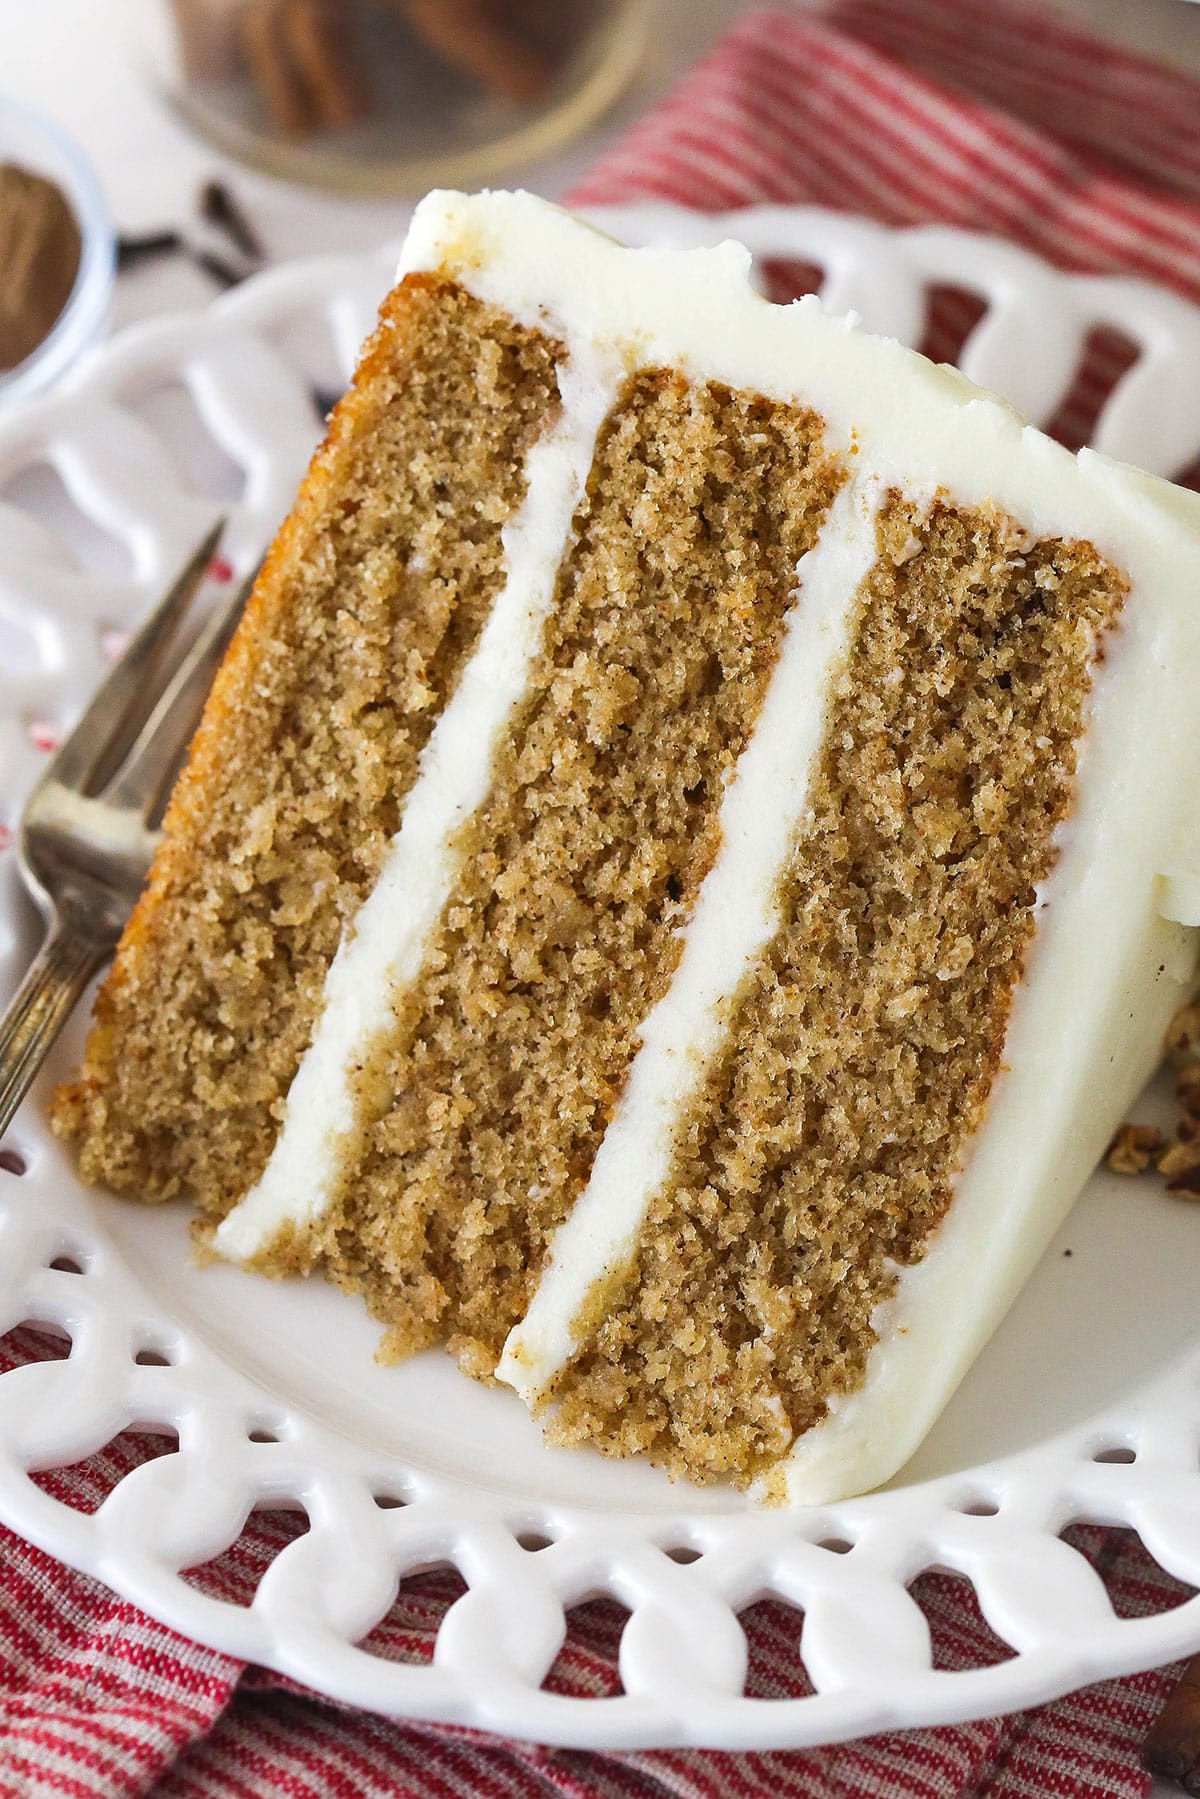 A slice of Spice Cake on a white ruffled plate.